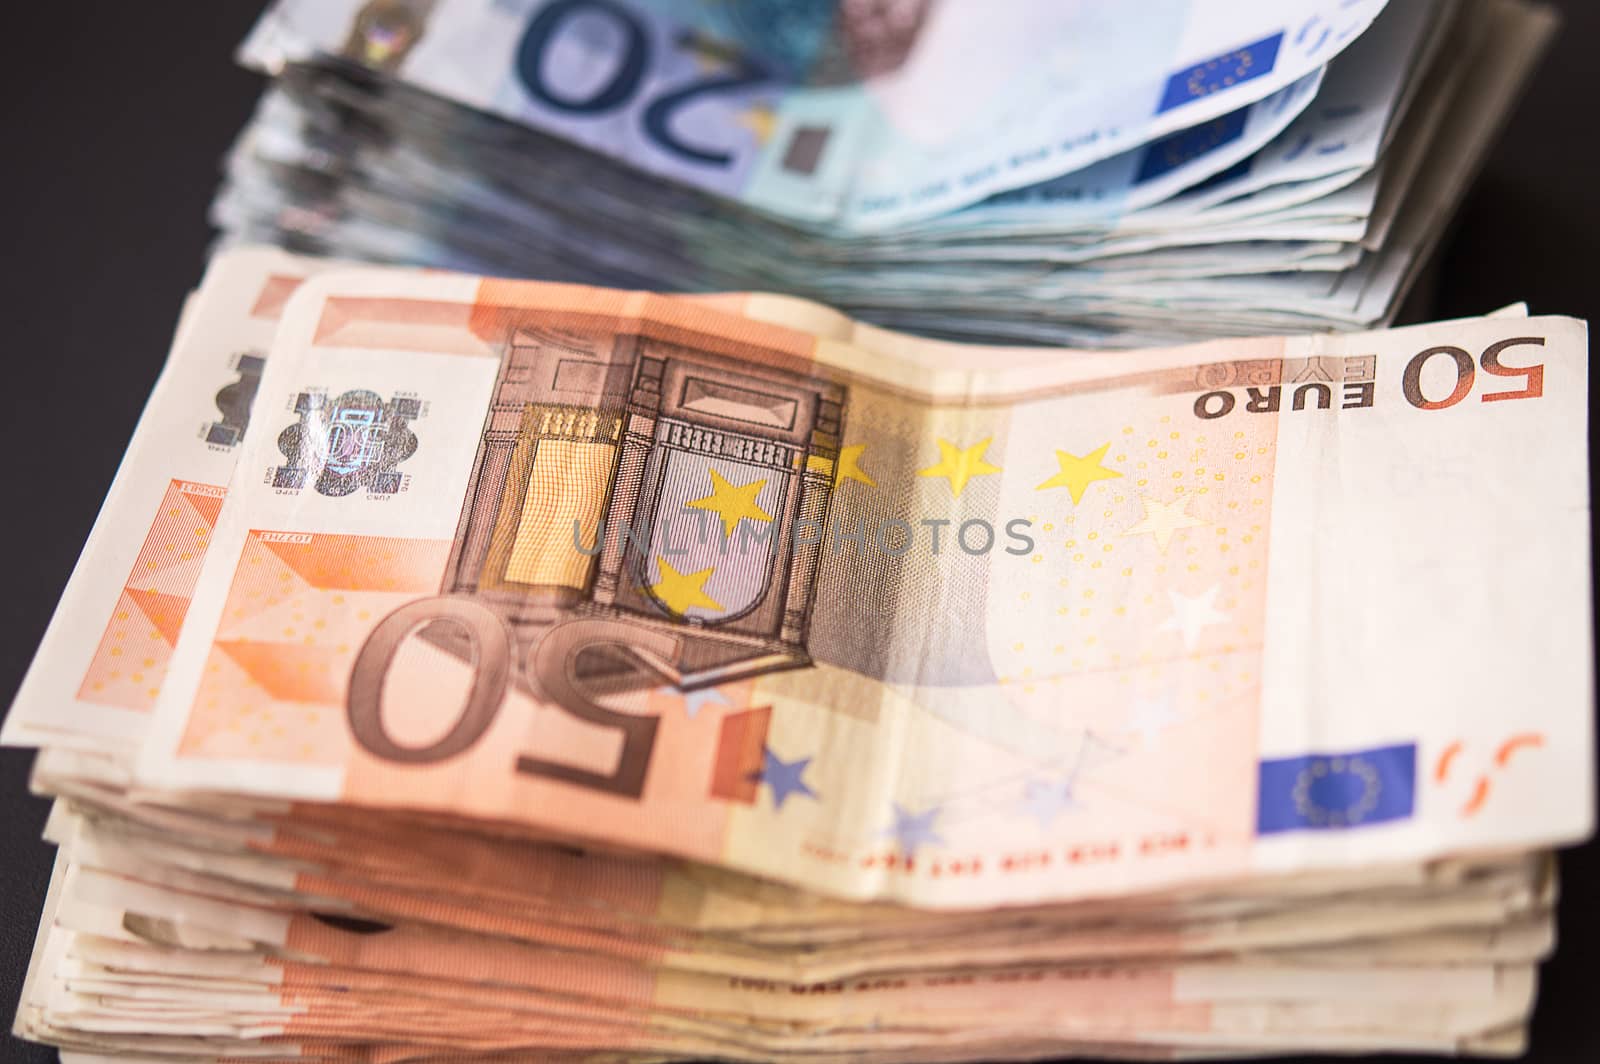 Euro banknotes in macro view